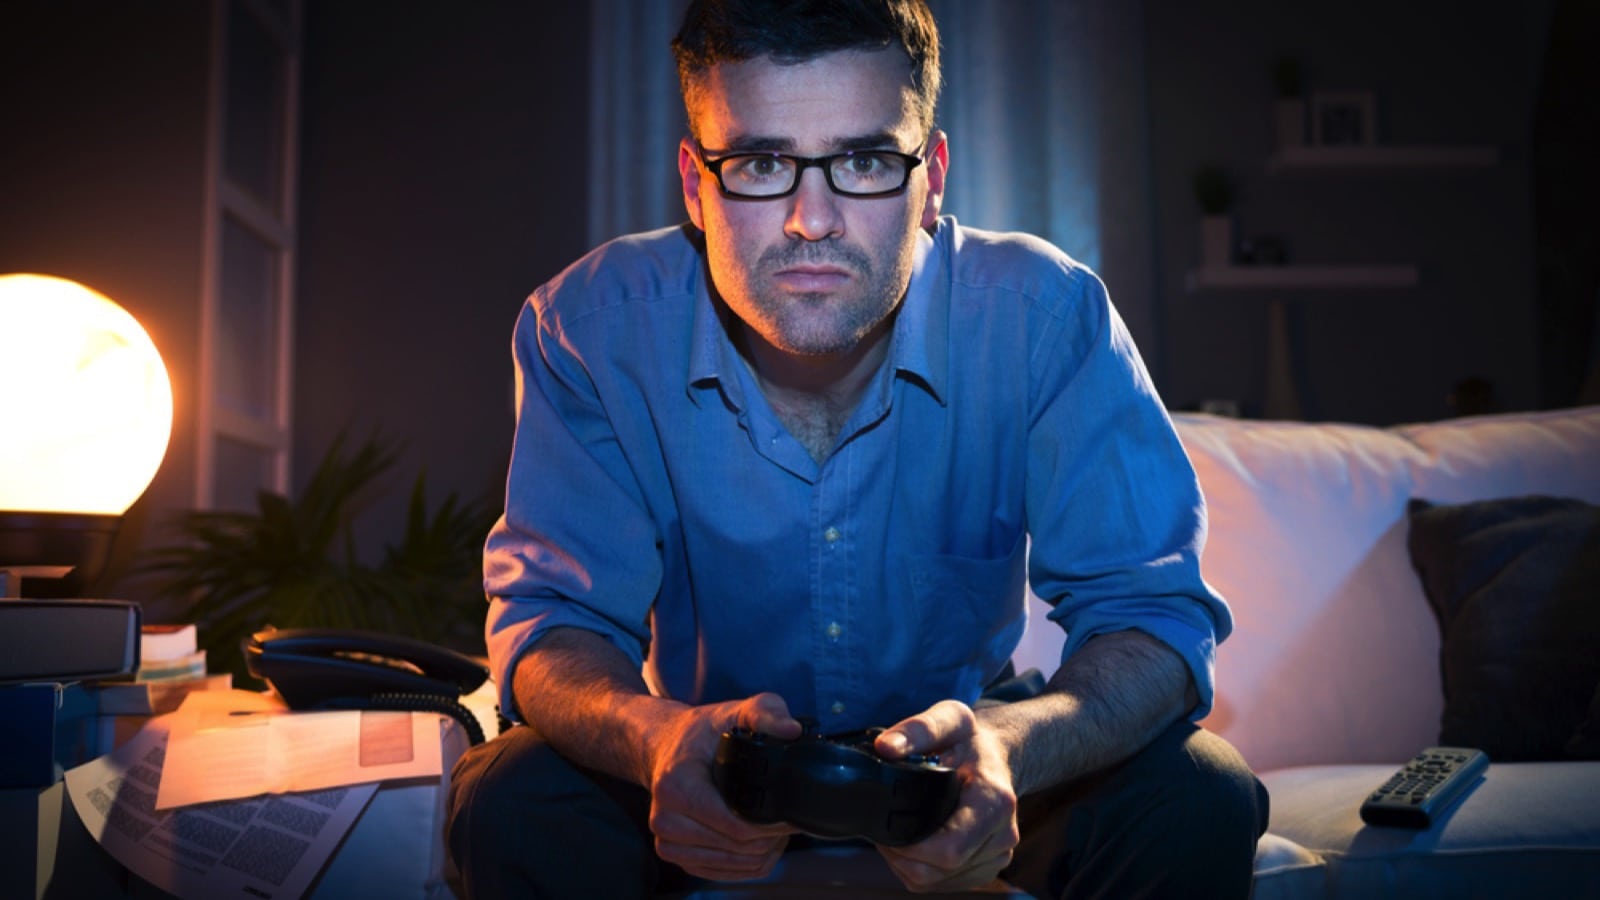 Man playing video game at midnight